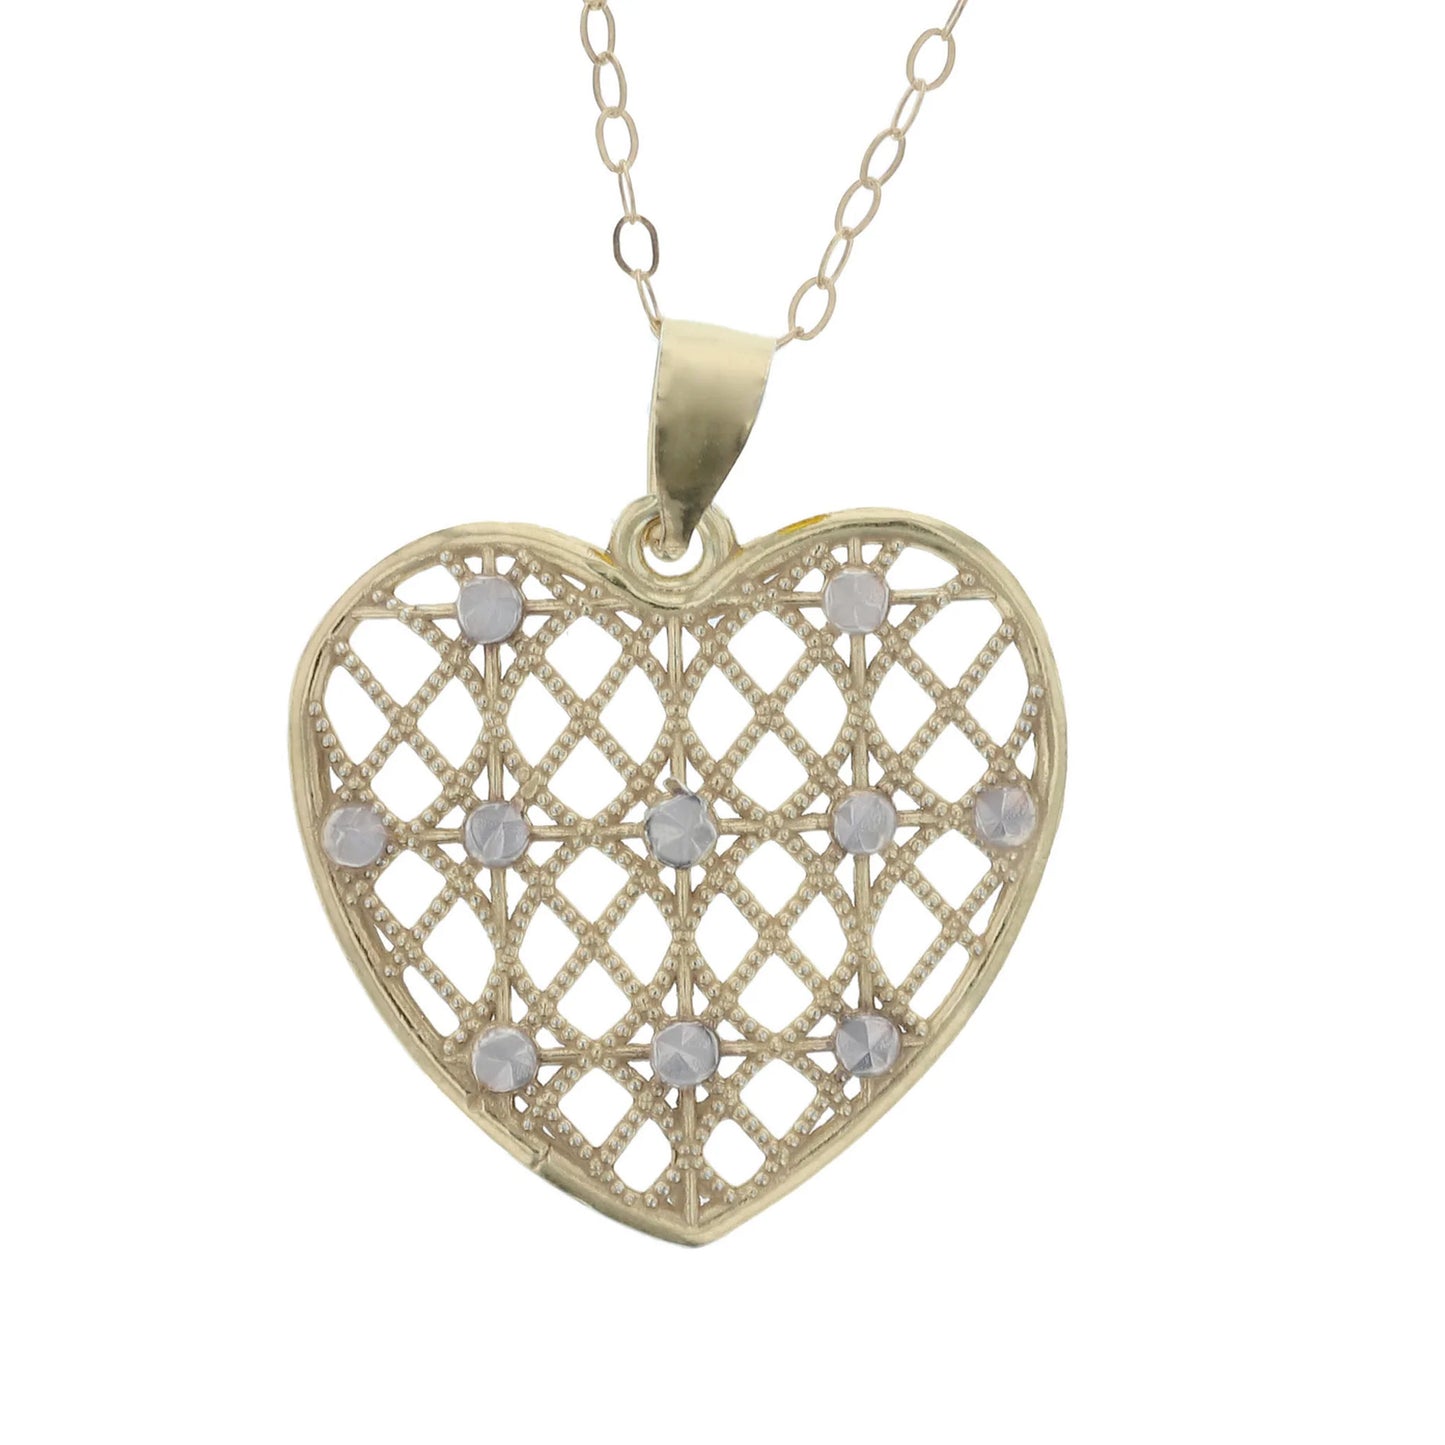 Gold Plated Sterling Silver Diamond Cut Filigree Fuffed Heart Pendant Necklace